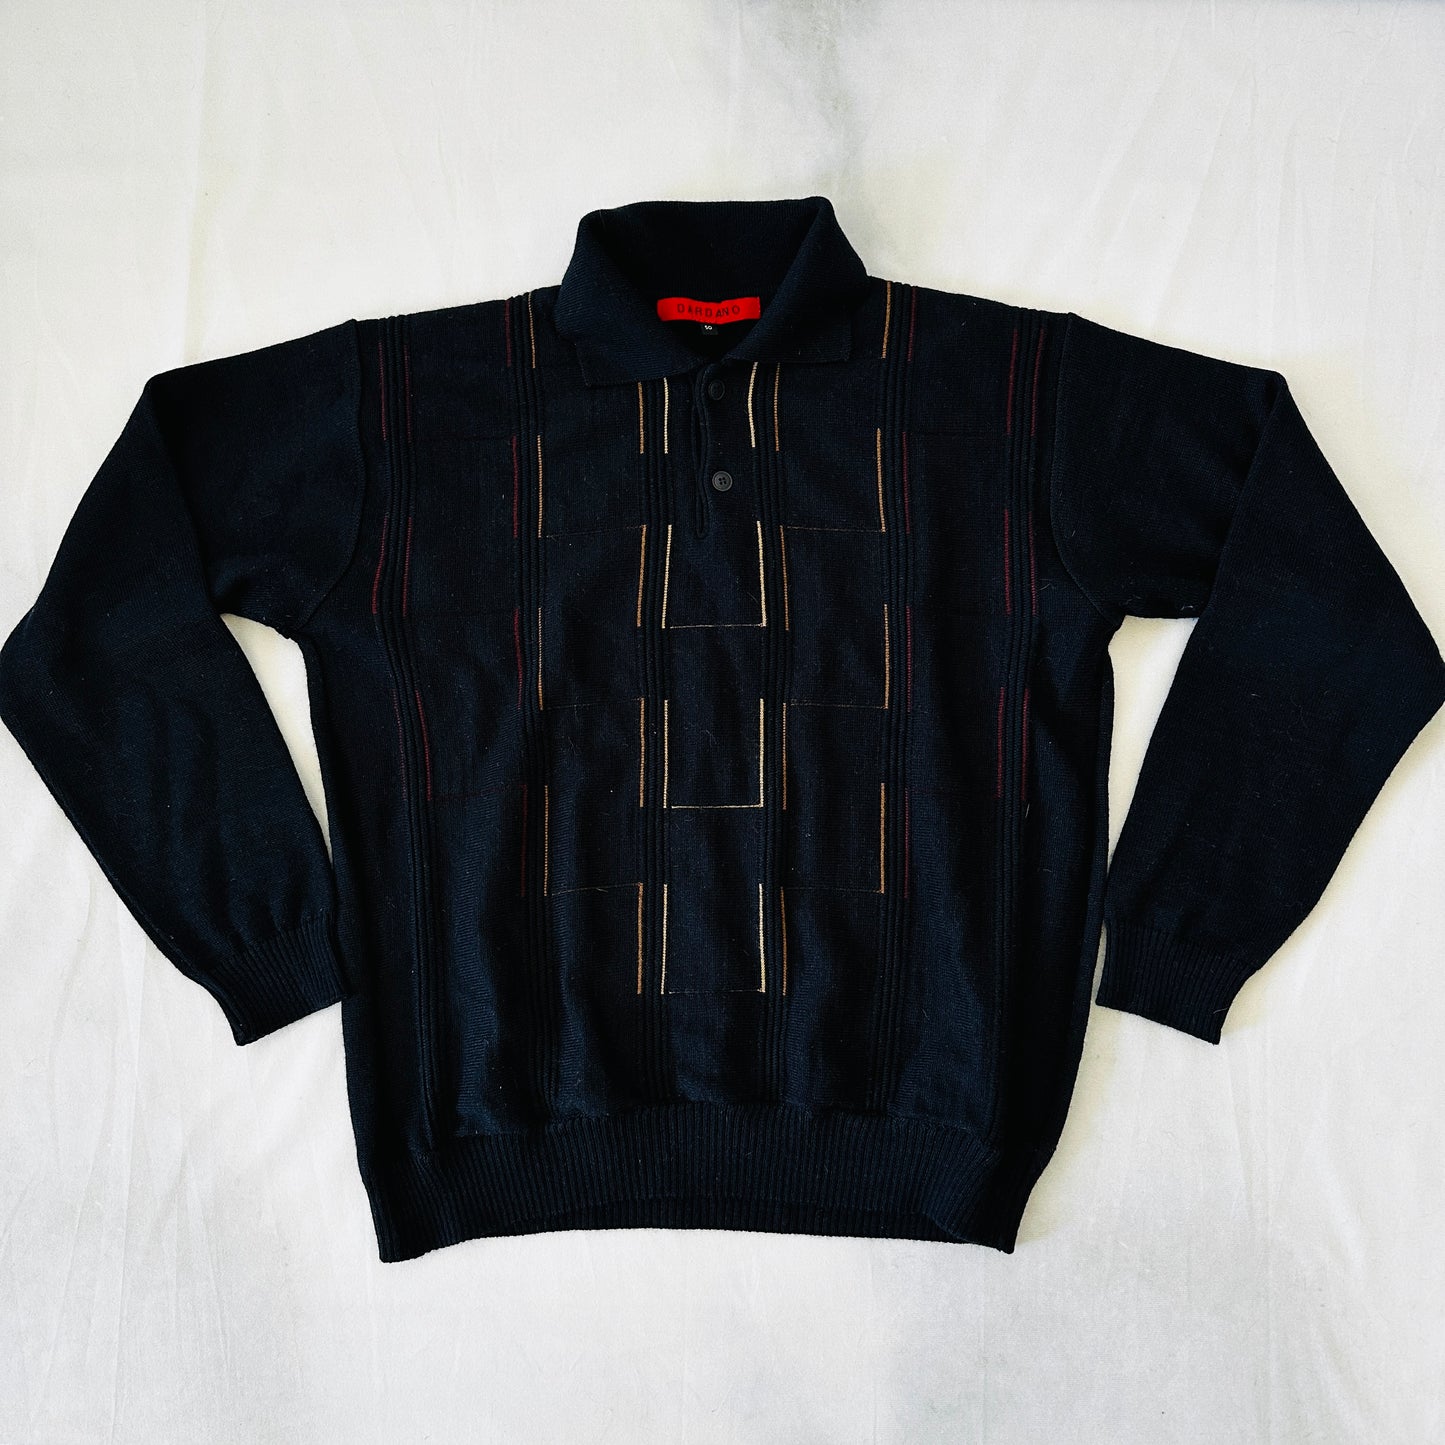 Dardano Vintage Sweater - 50 / M  - Made in Italy